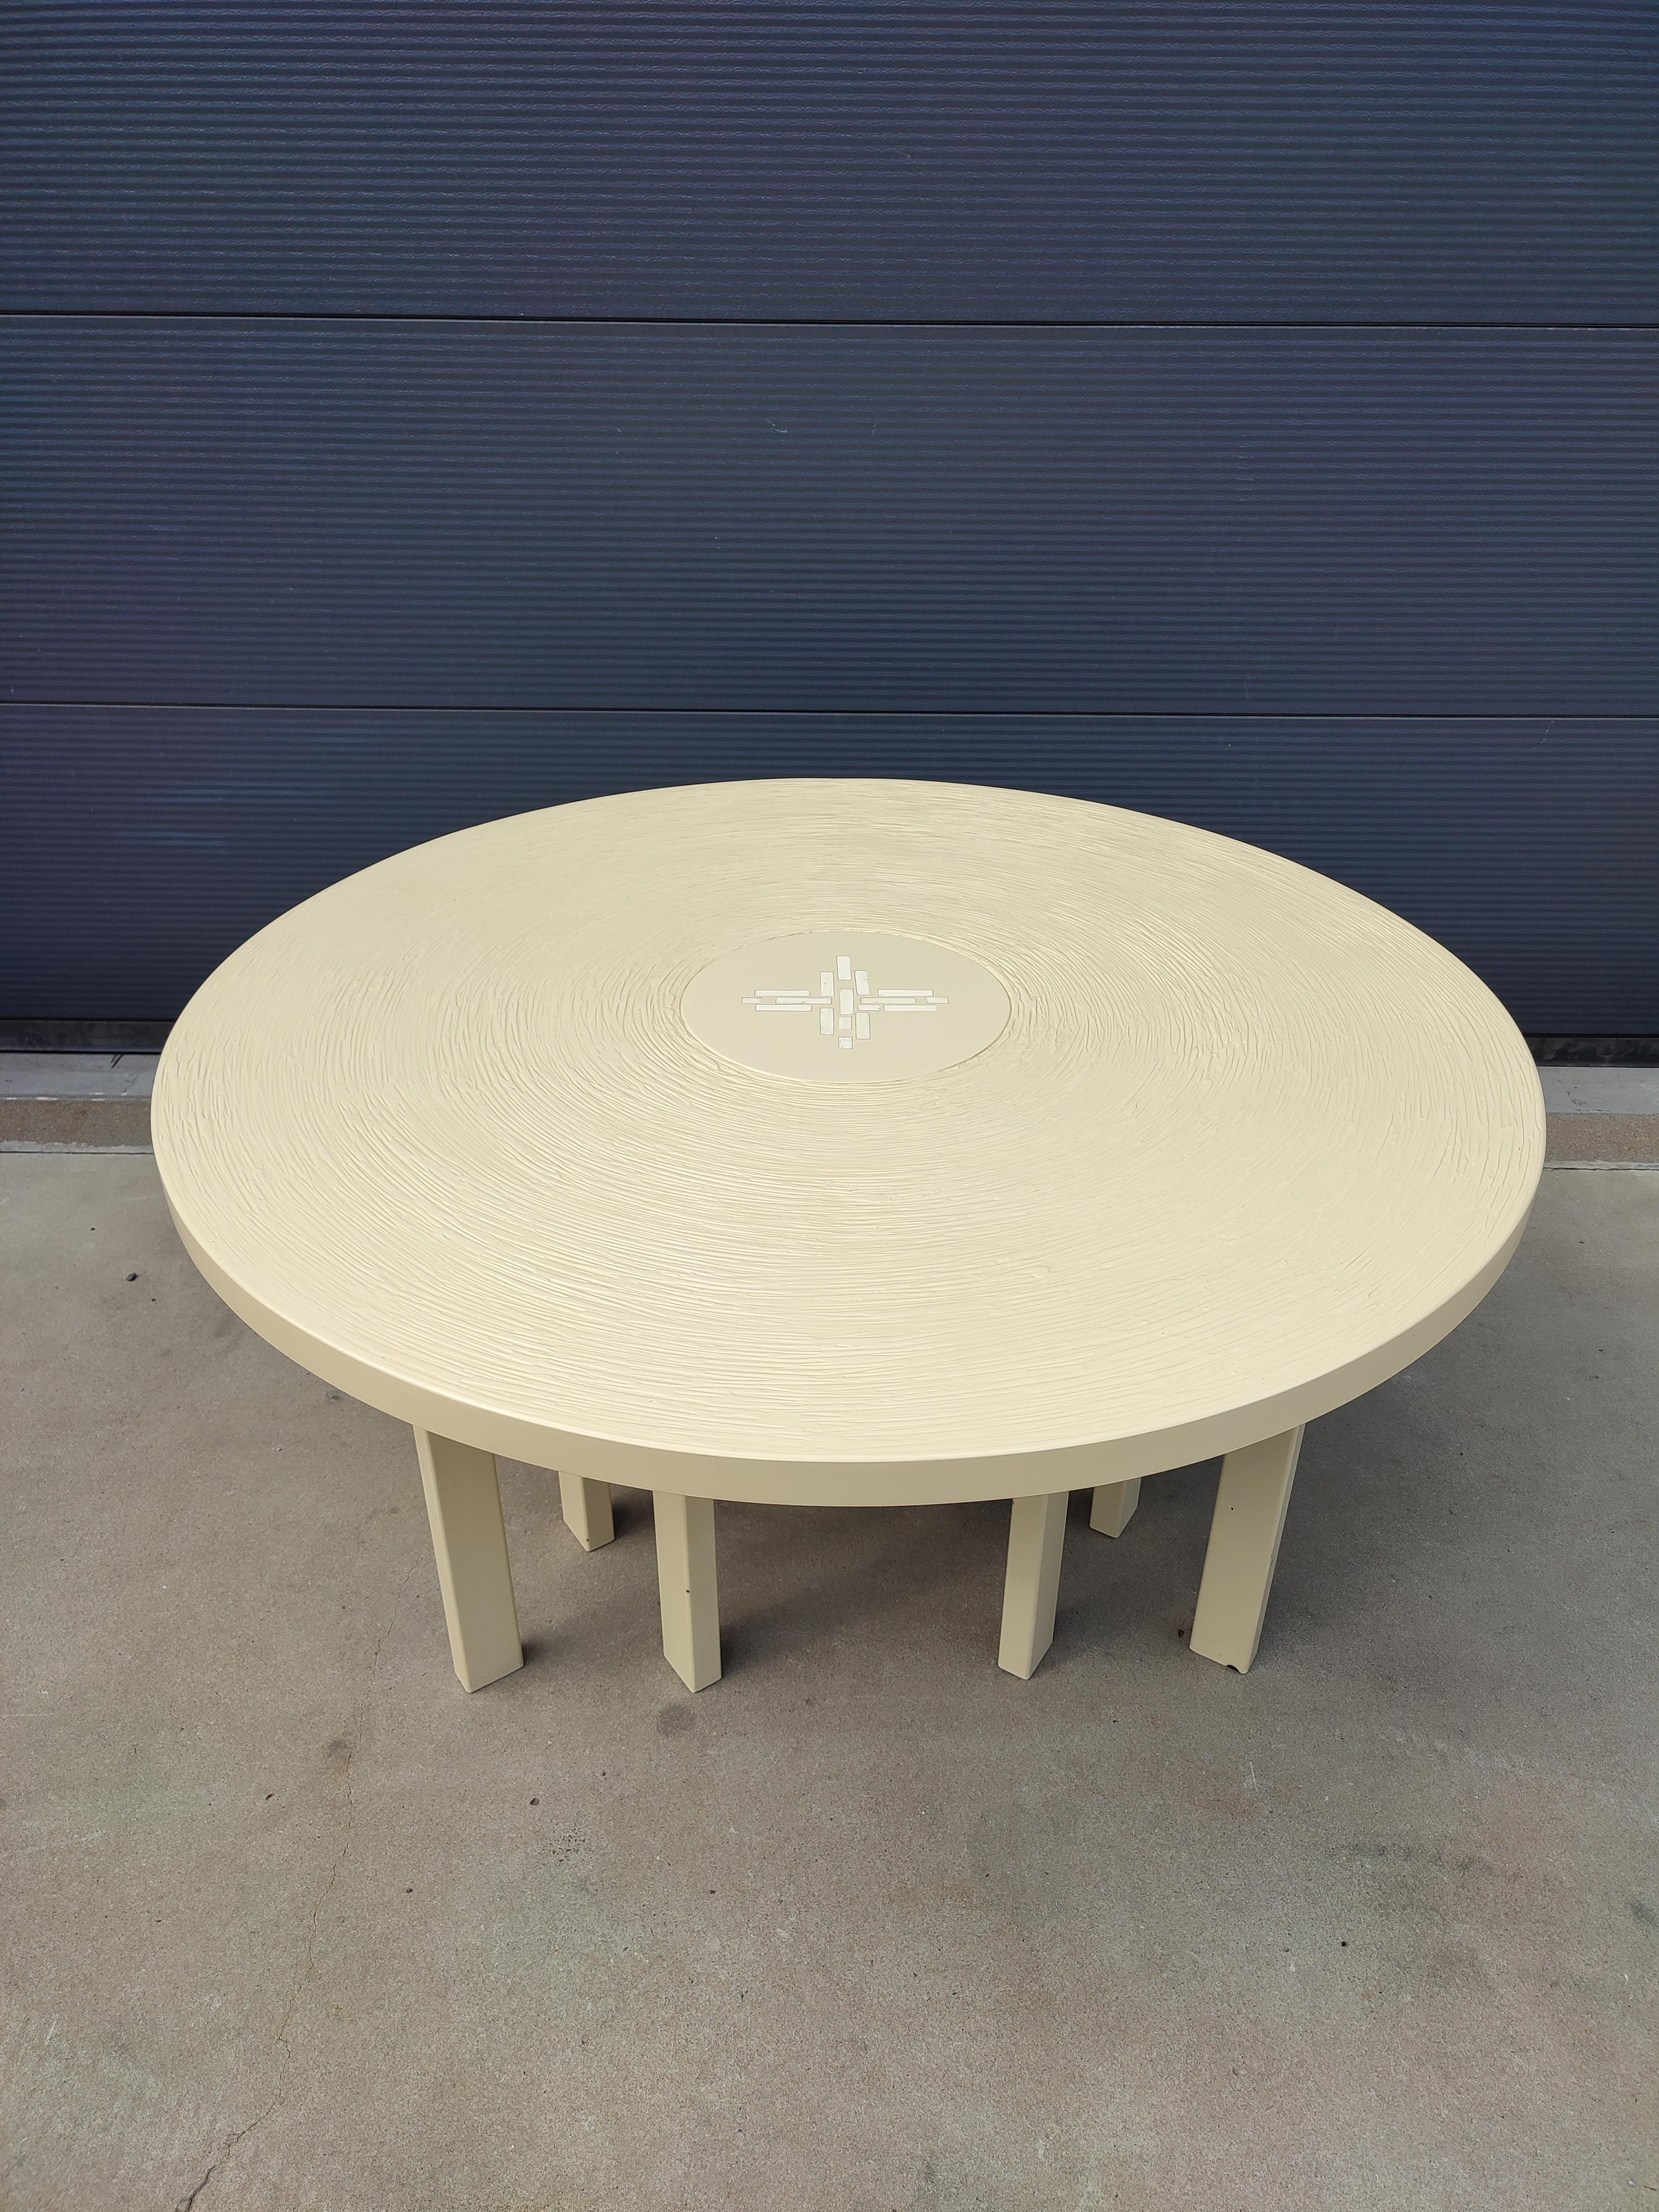 Mid-Century Modern Round Dining Table in White/ Cream from Jean Claude Dresse For Sale